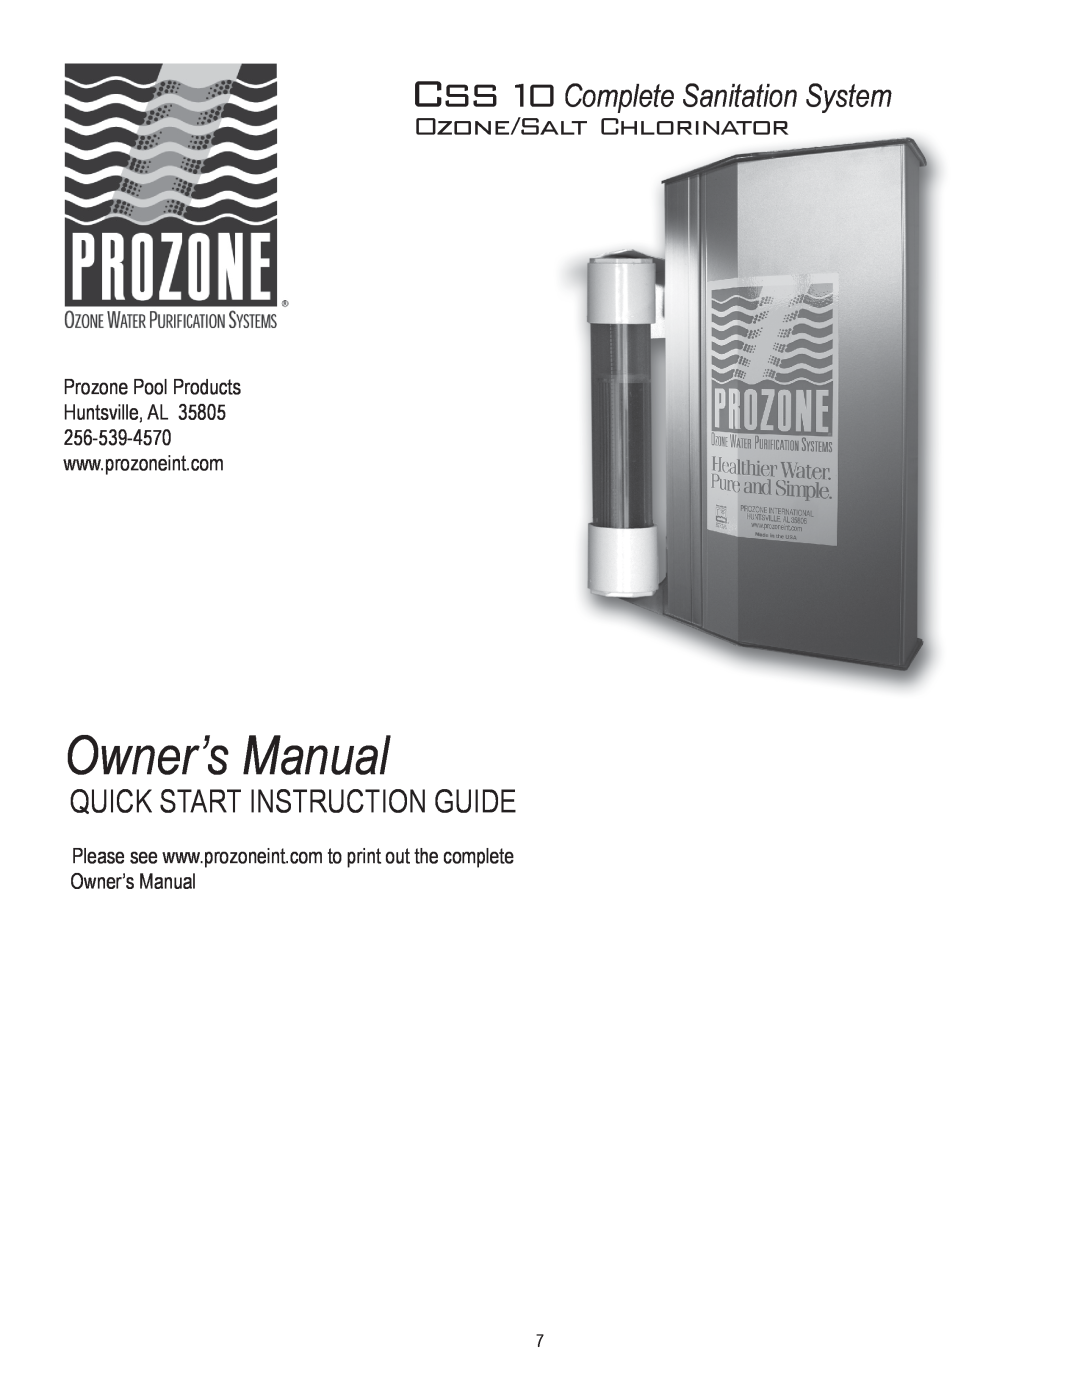 Prozone Pool Products Quick Start Instruction Guide, CSS10 Complete Sanitation System, Ozone/Salt Chlorinator 